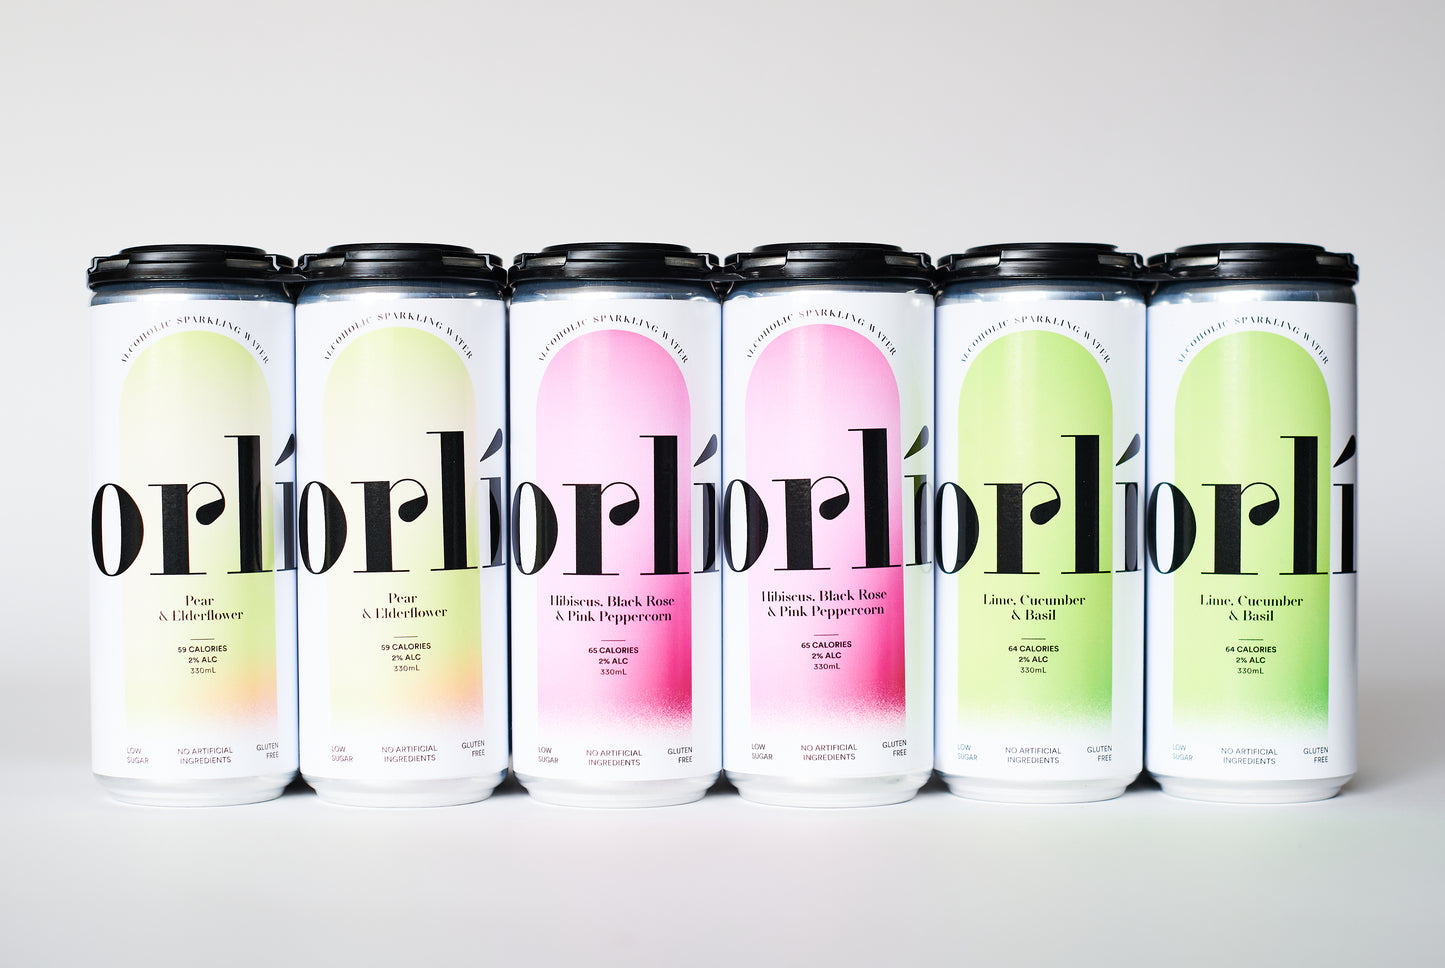 6 cans - 2 Pear and Elderflow, 2 Hibiscus, Black Rose and Pink Peppercorn, 2 Lime, Cucumber and Basil